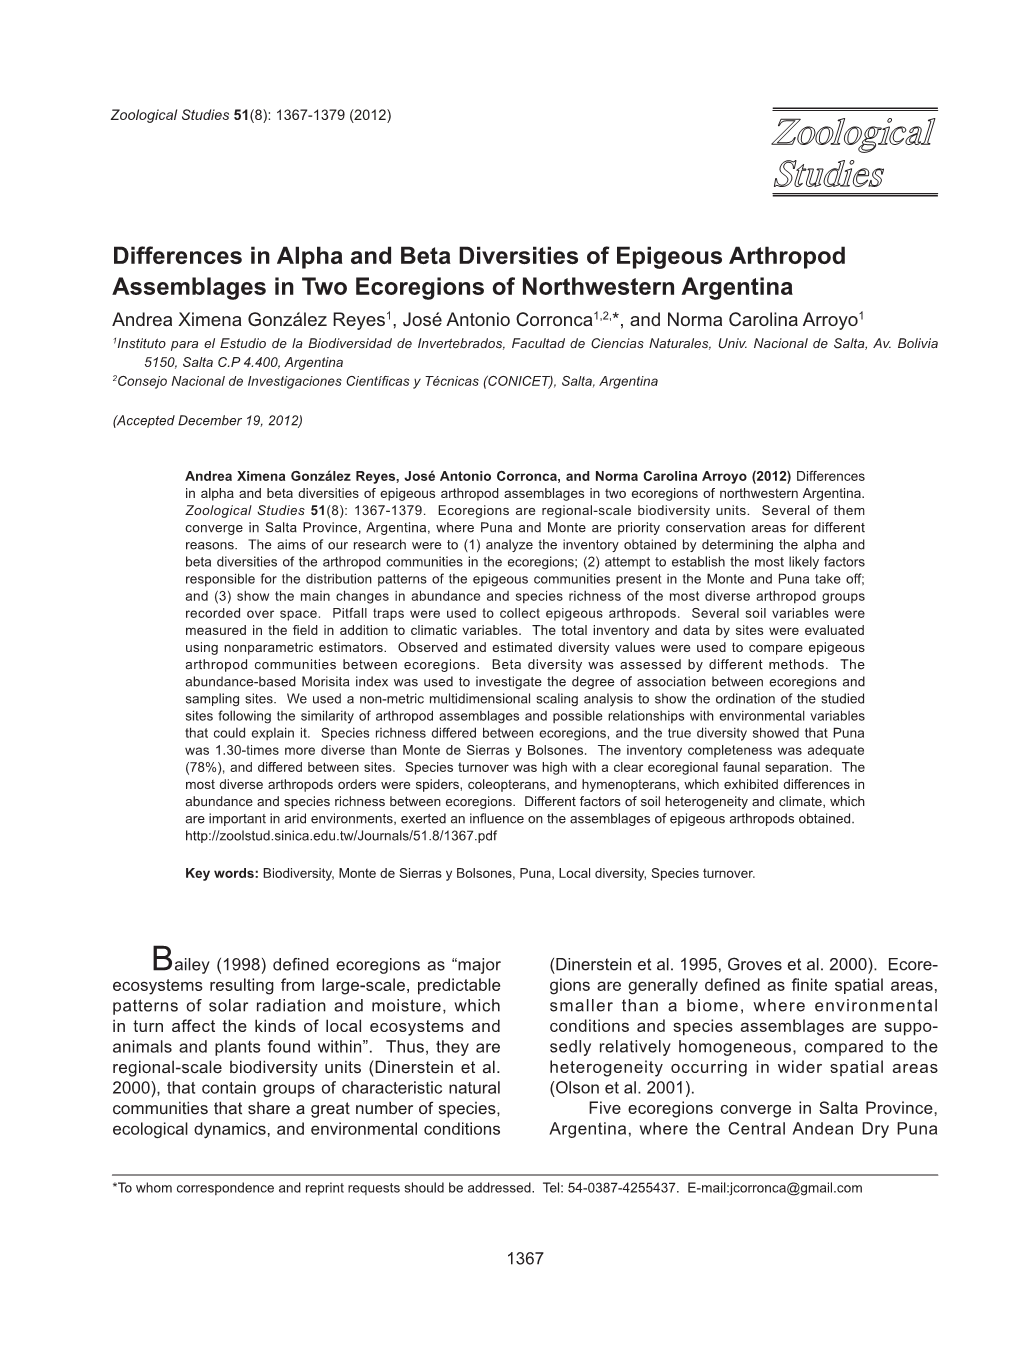 Differences in Alpha and Beta Diversities of Epigeous Arthropod